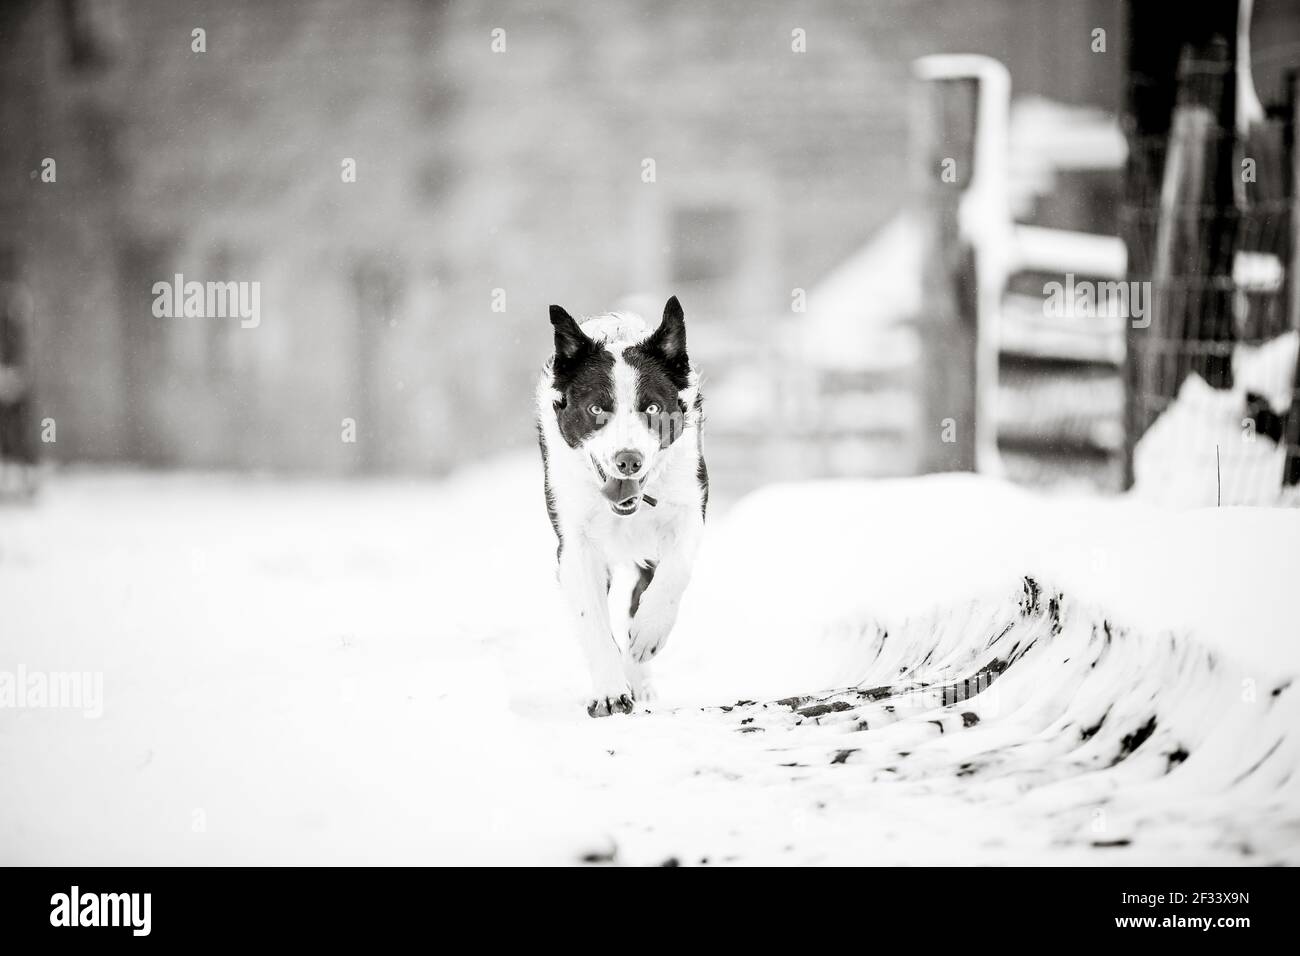 Border collie sheepdog dog running in the snow Stock Photo